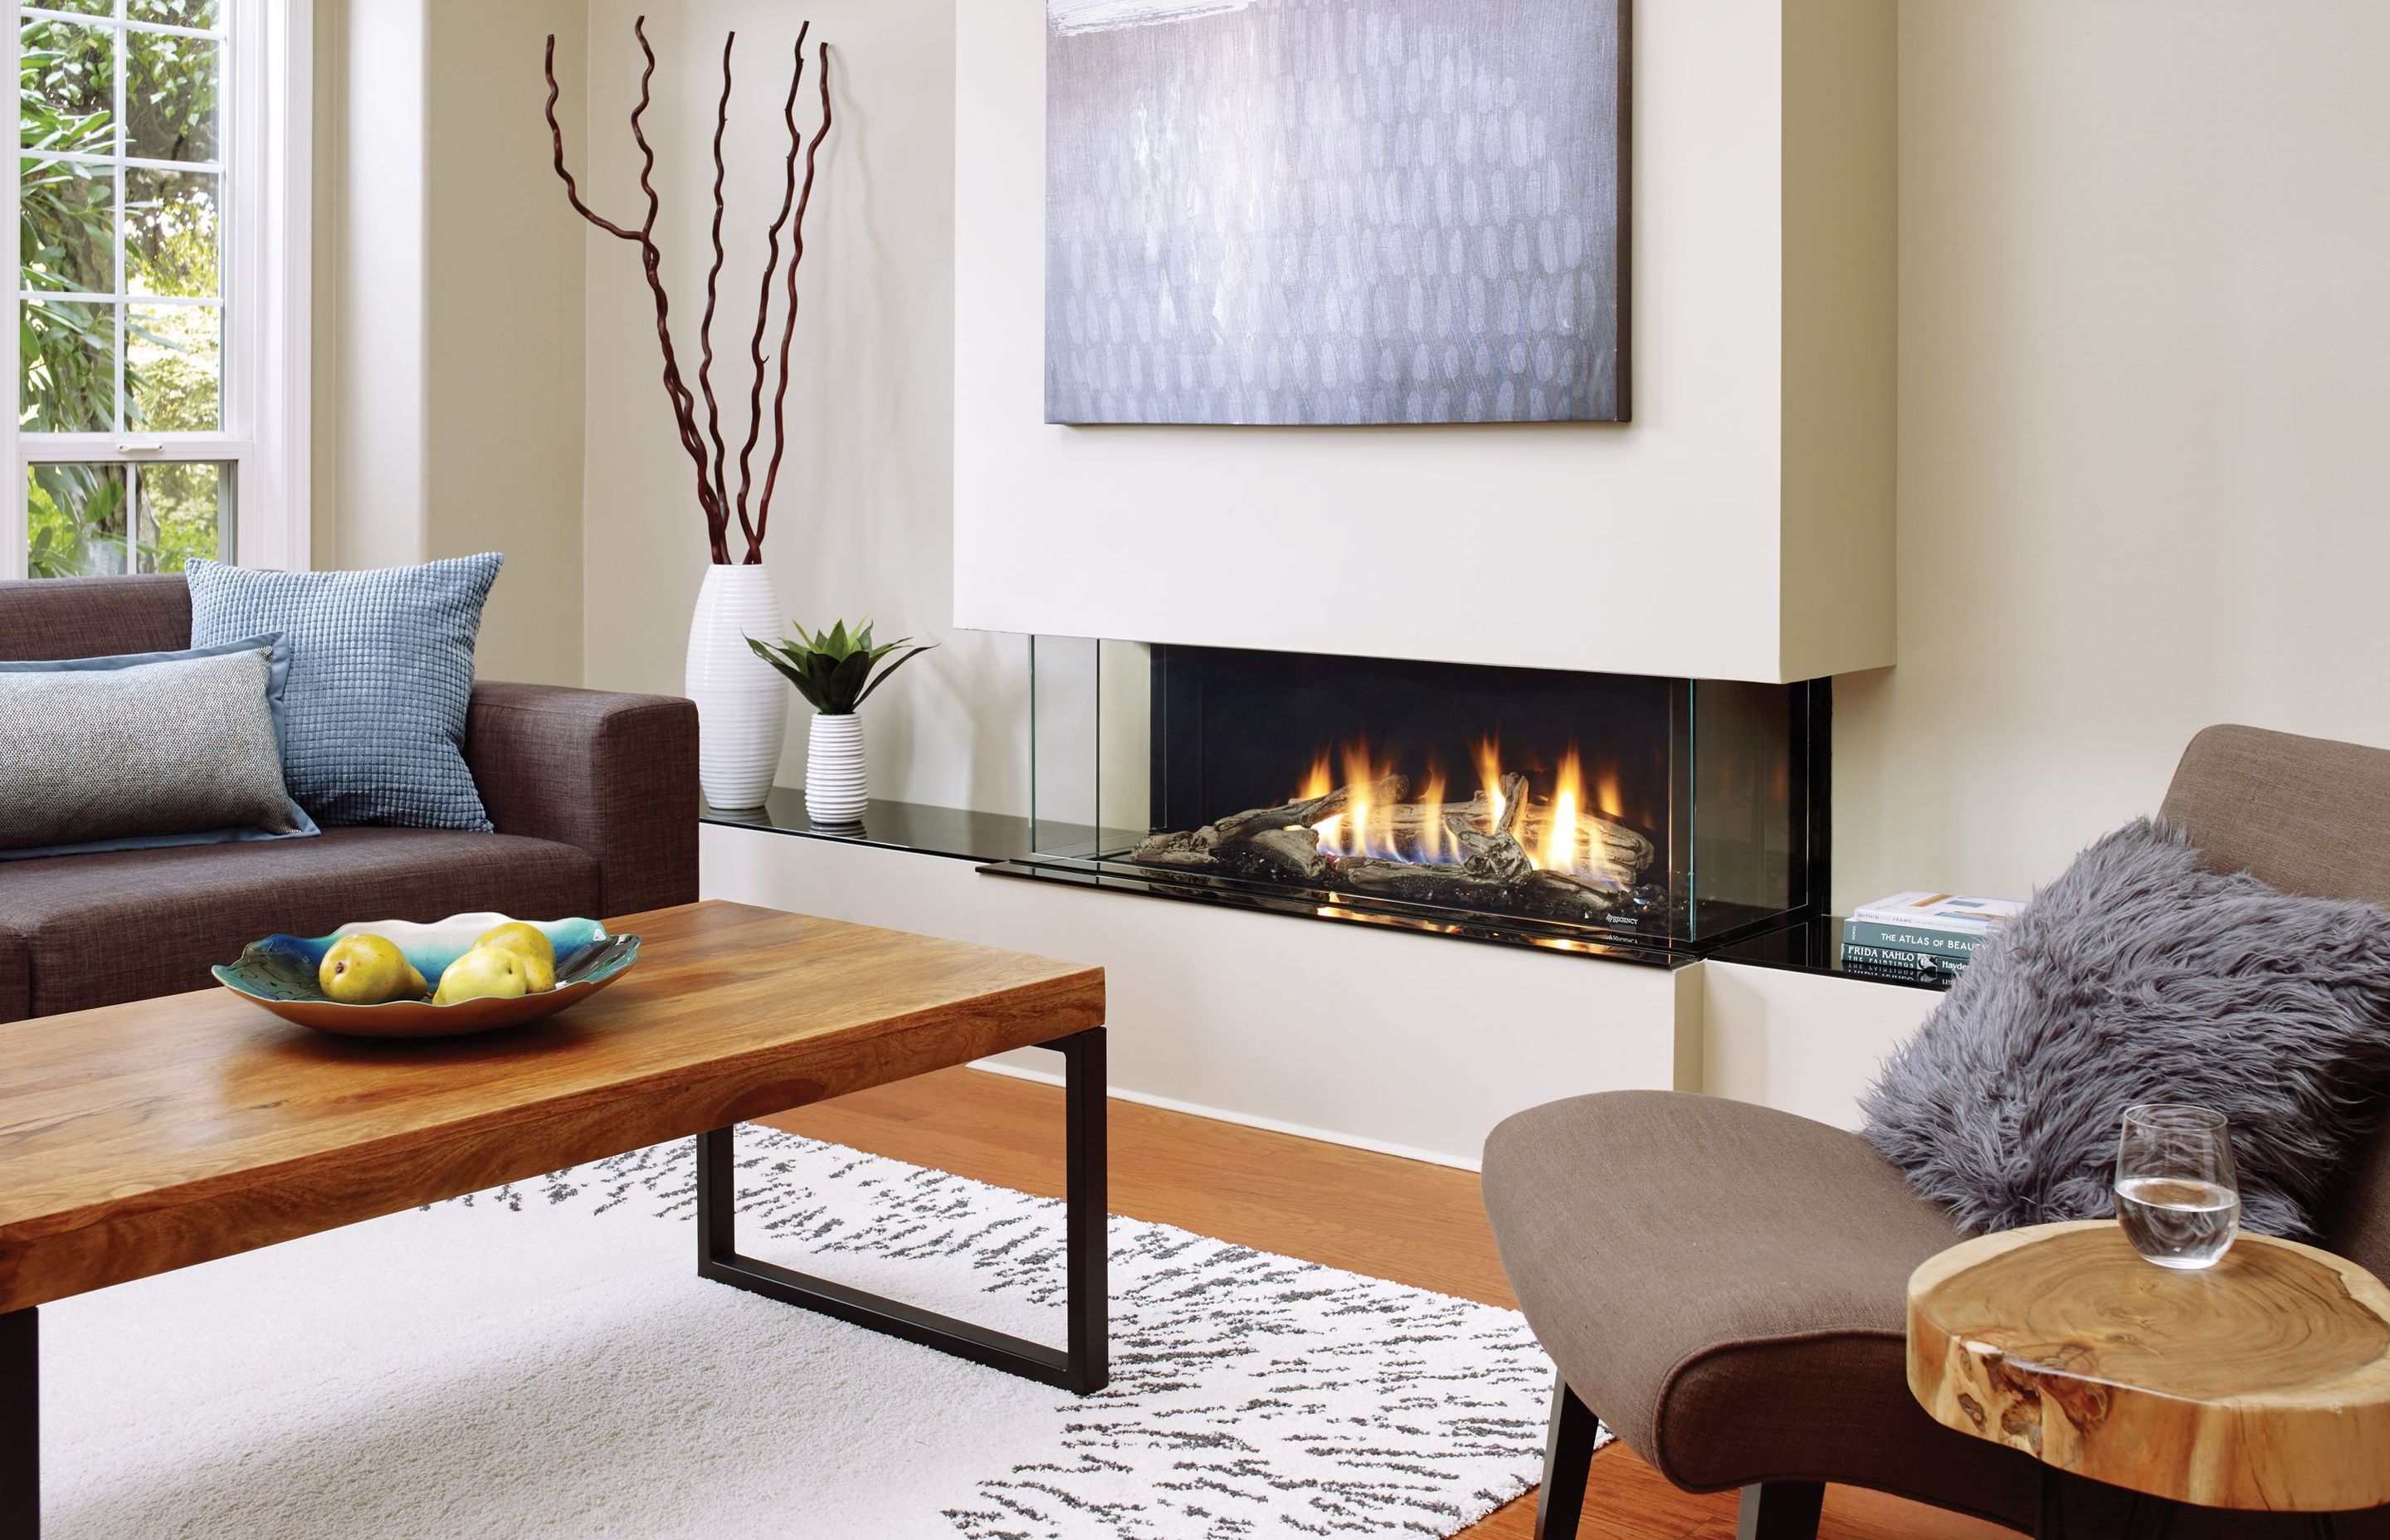 The three-sided San Francisco Bay fireplace. Part of the City Series by Regency.